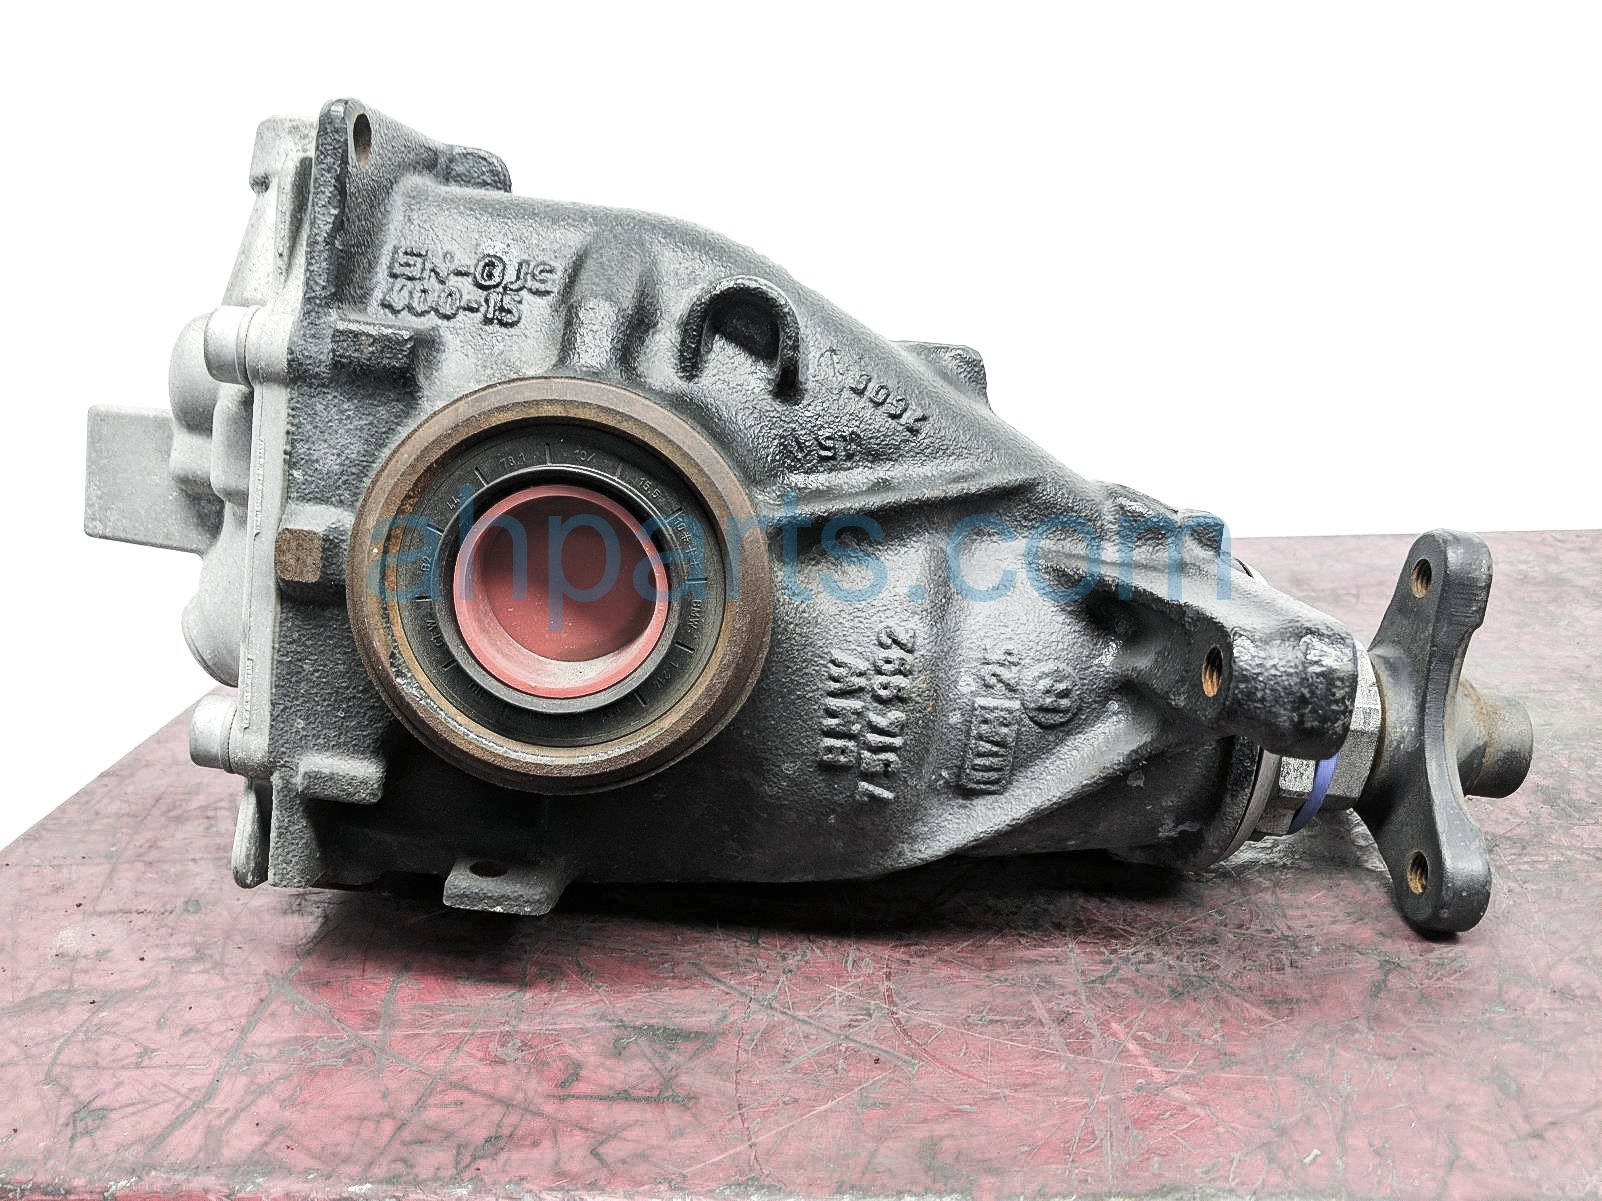 $150 BMW REAR DIFFERENTIAL CARRIER ASSY